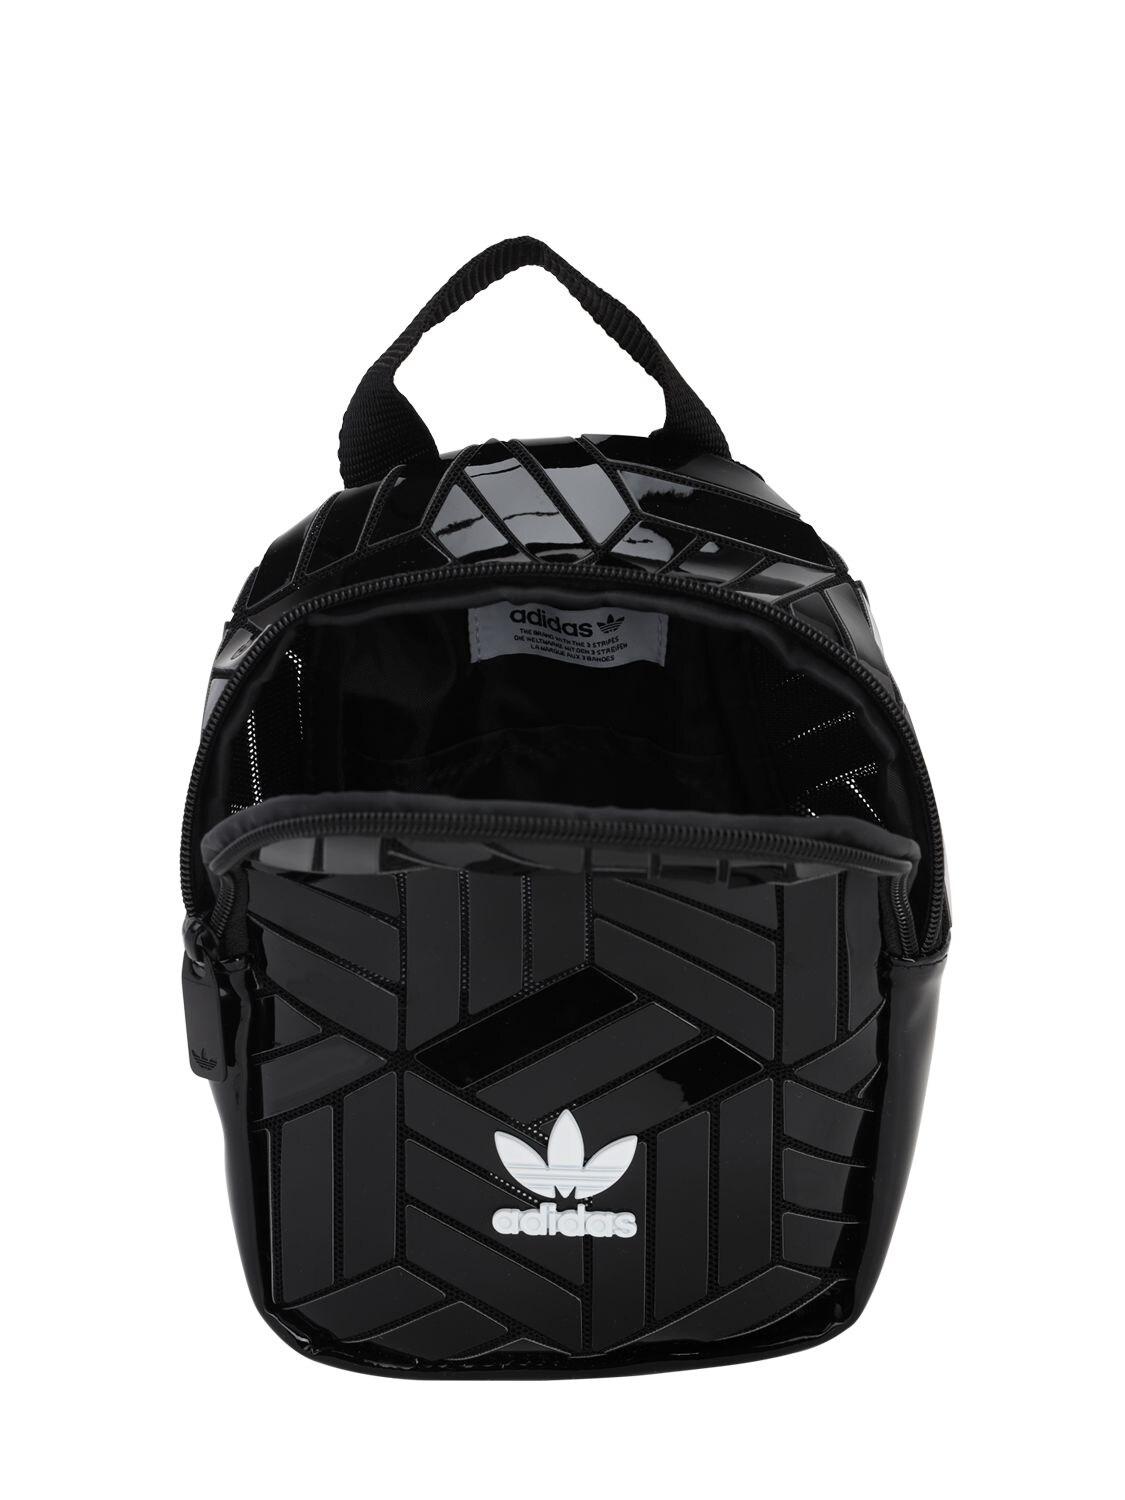 adidas Originals Mini Faux Patent Leather Backpack in Black | Lyst